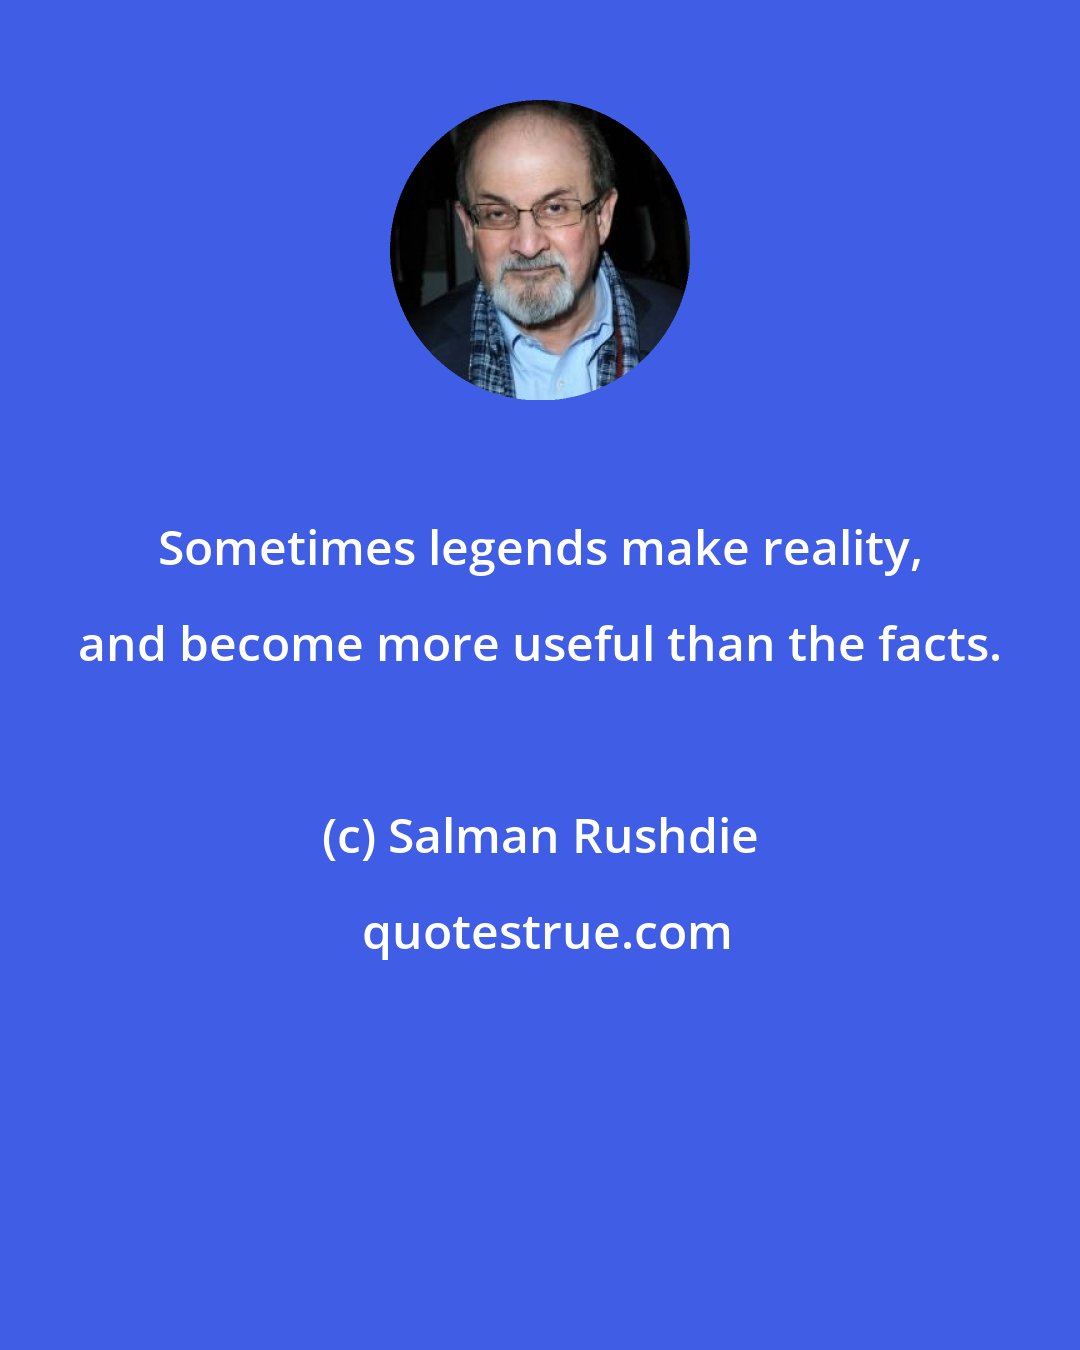 Salman Rushdie: Sometimes legends make reality, and become more useful than the facts.